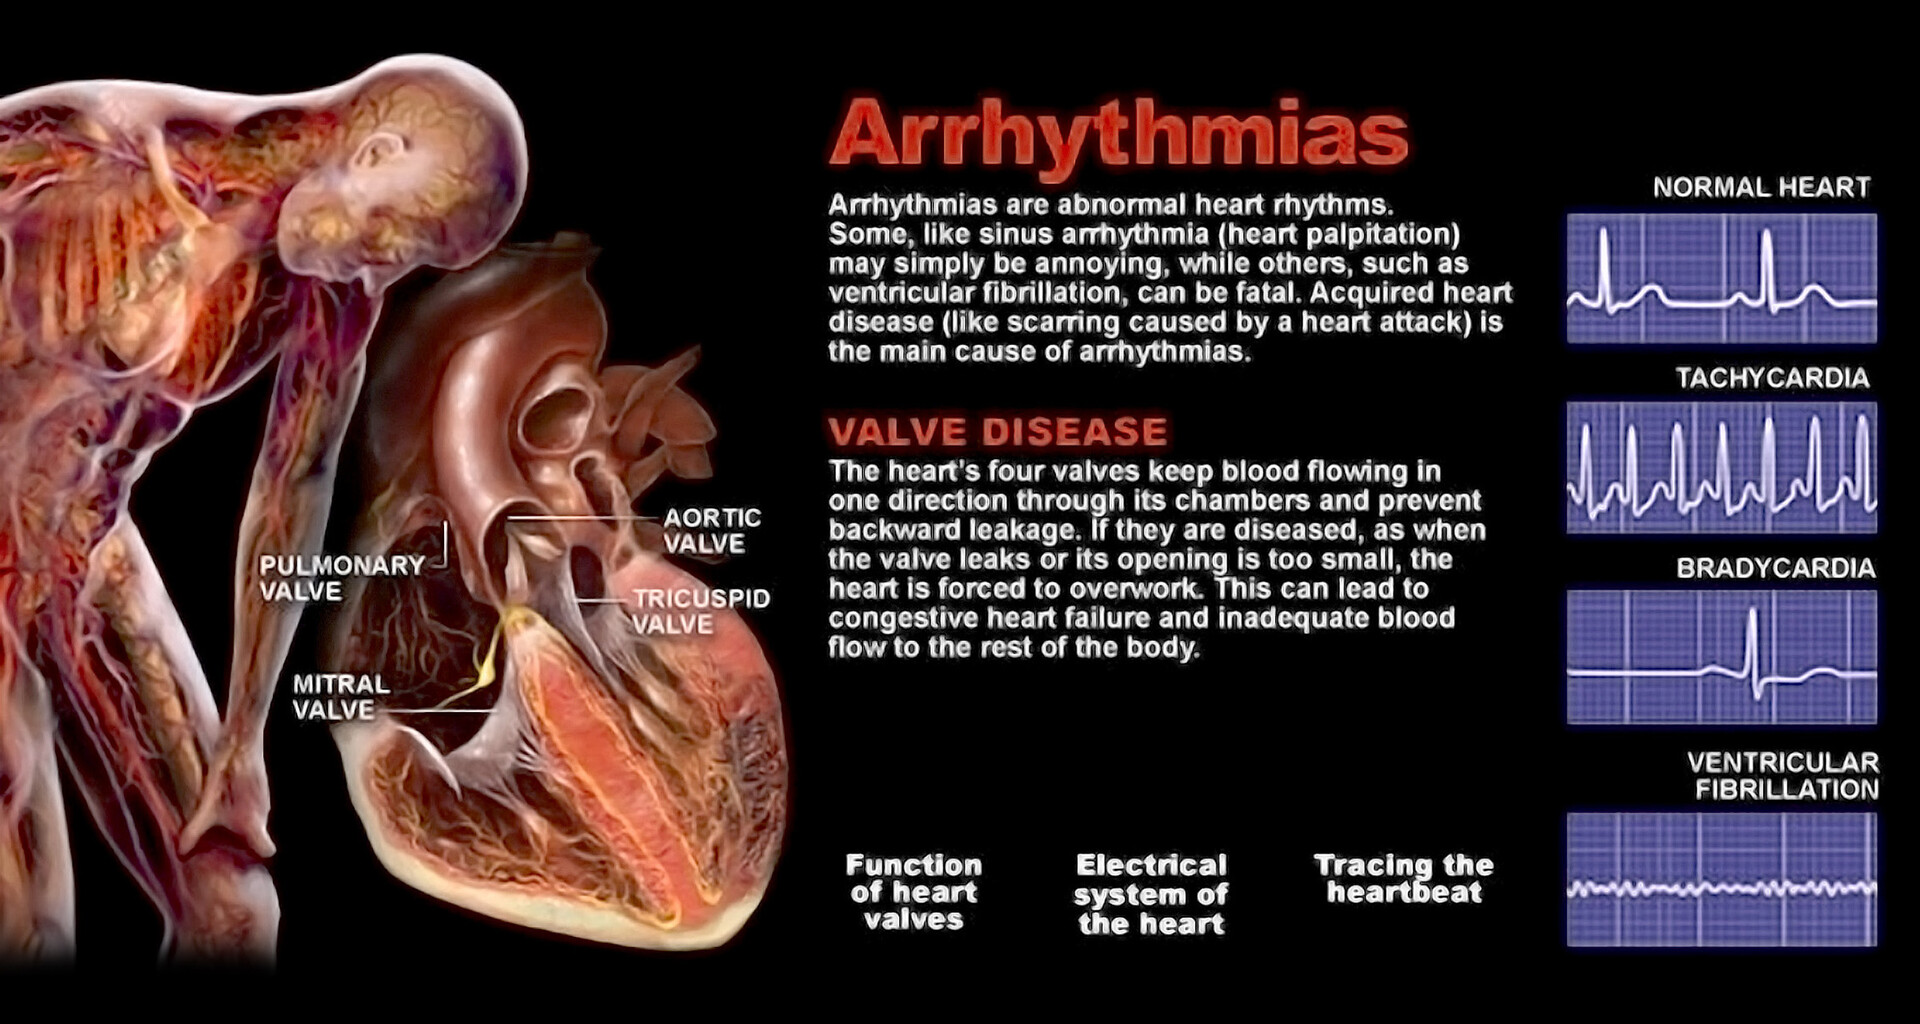 What Are the Types of Arrhythmias? - StoryMD